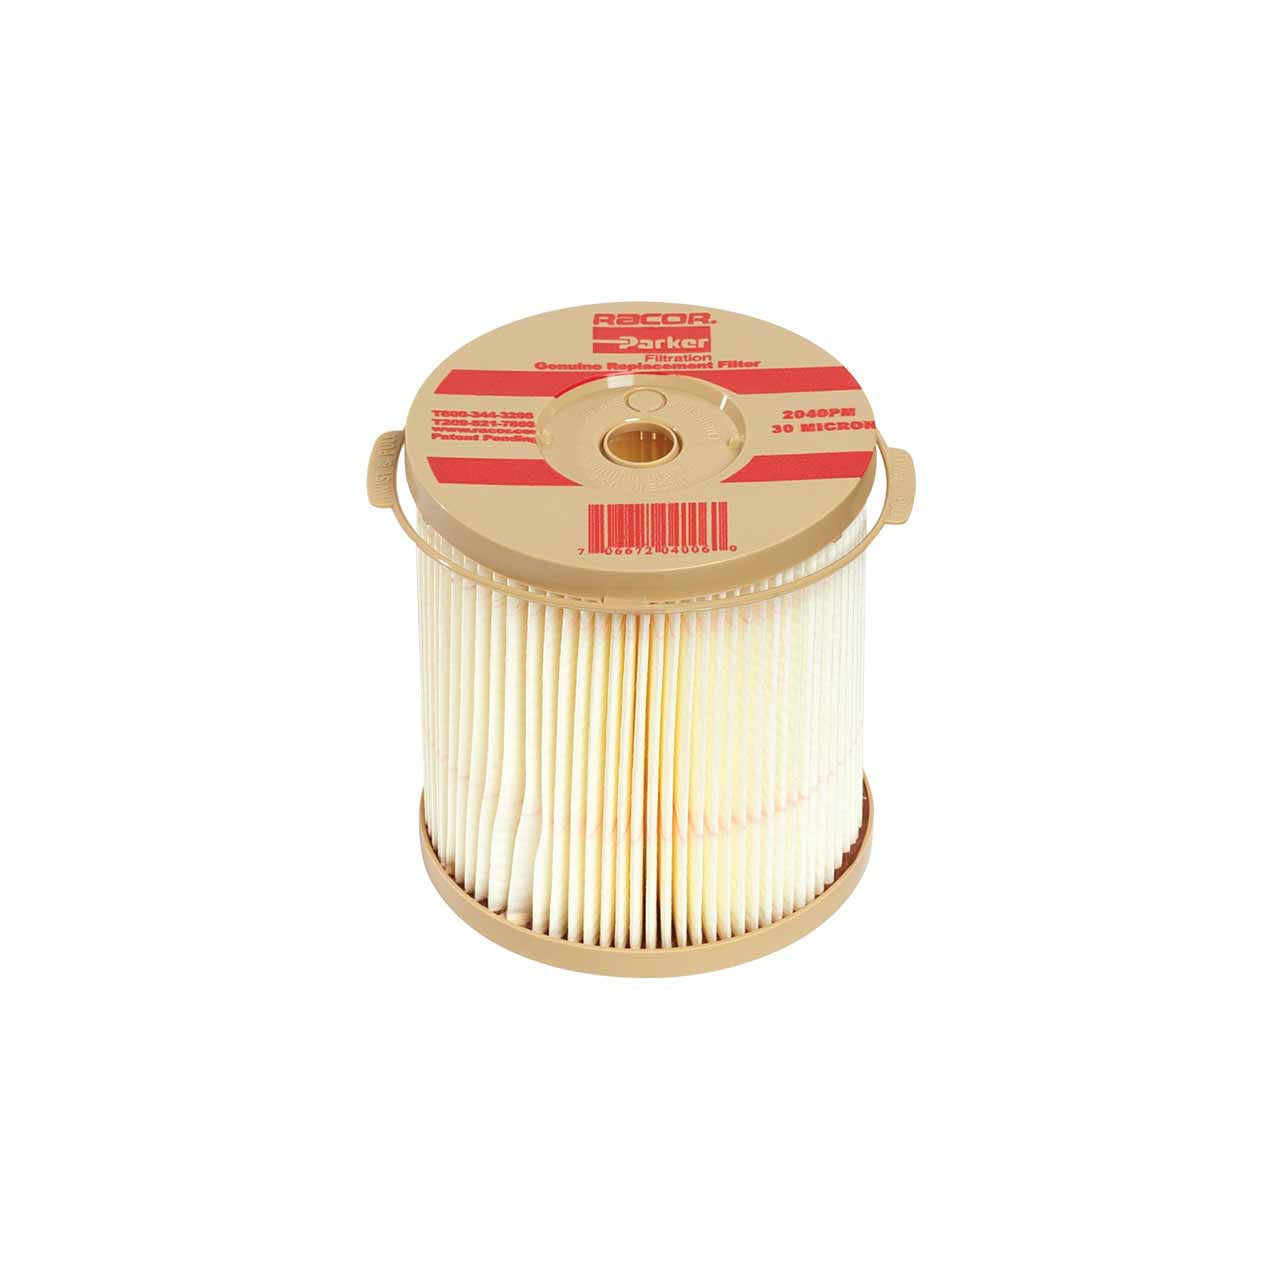 2040N-30 Racor Parker Replacement Filter Element (30 micron) 900 Turbine Series